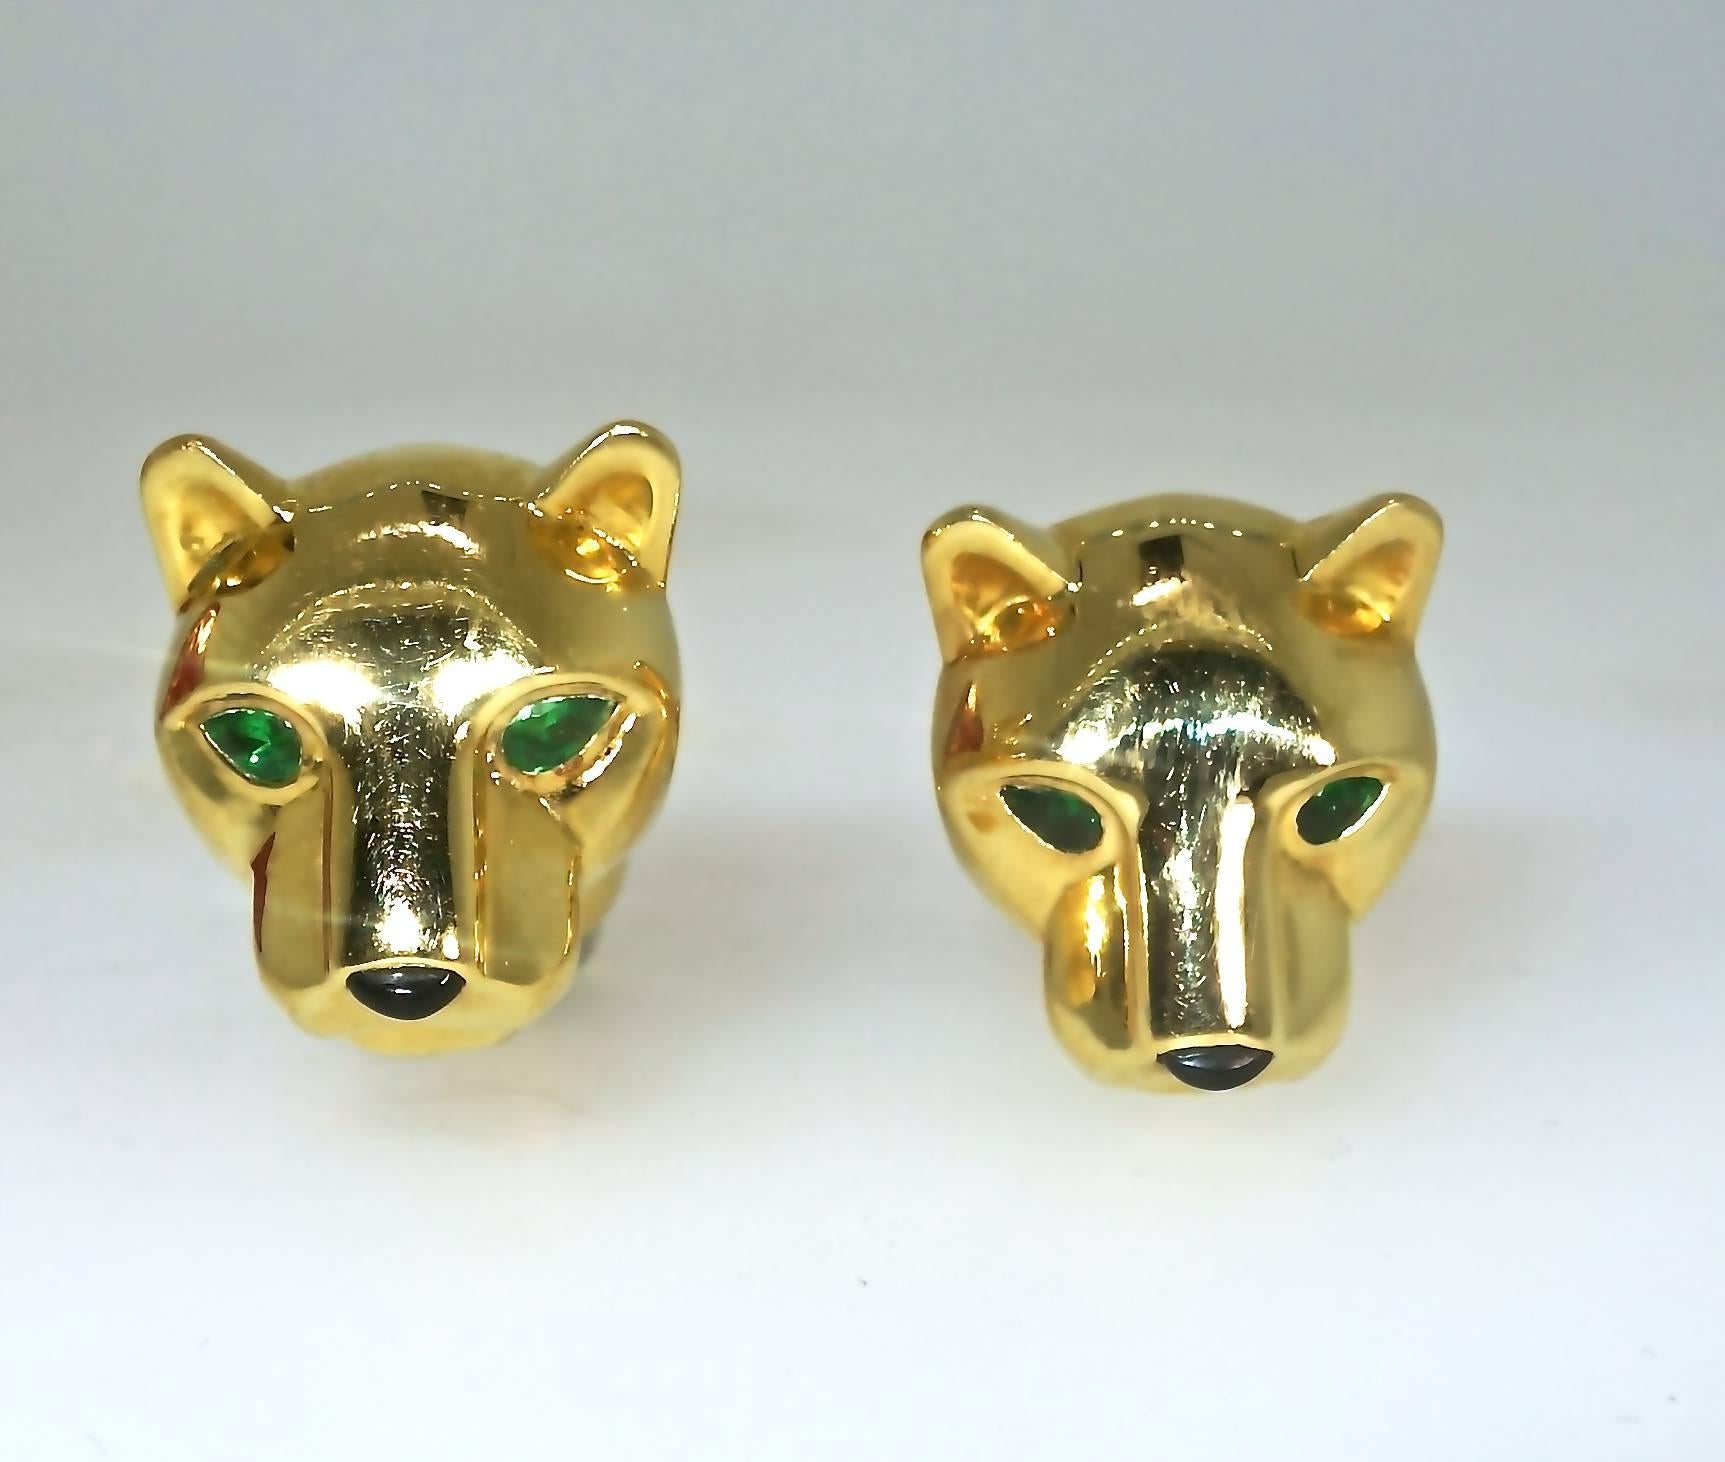 18K yellow gold with emerald eyes and black enamel on his nose and on the bar bell back, these cufflinks are signed, numbered and with French hallmarks